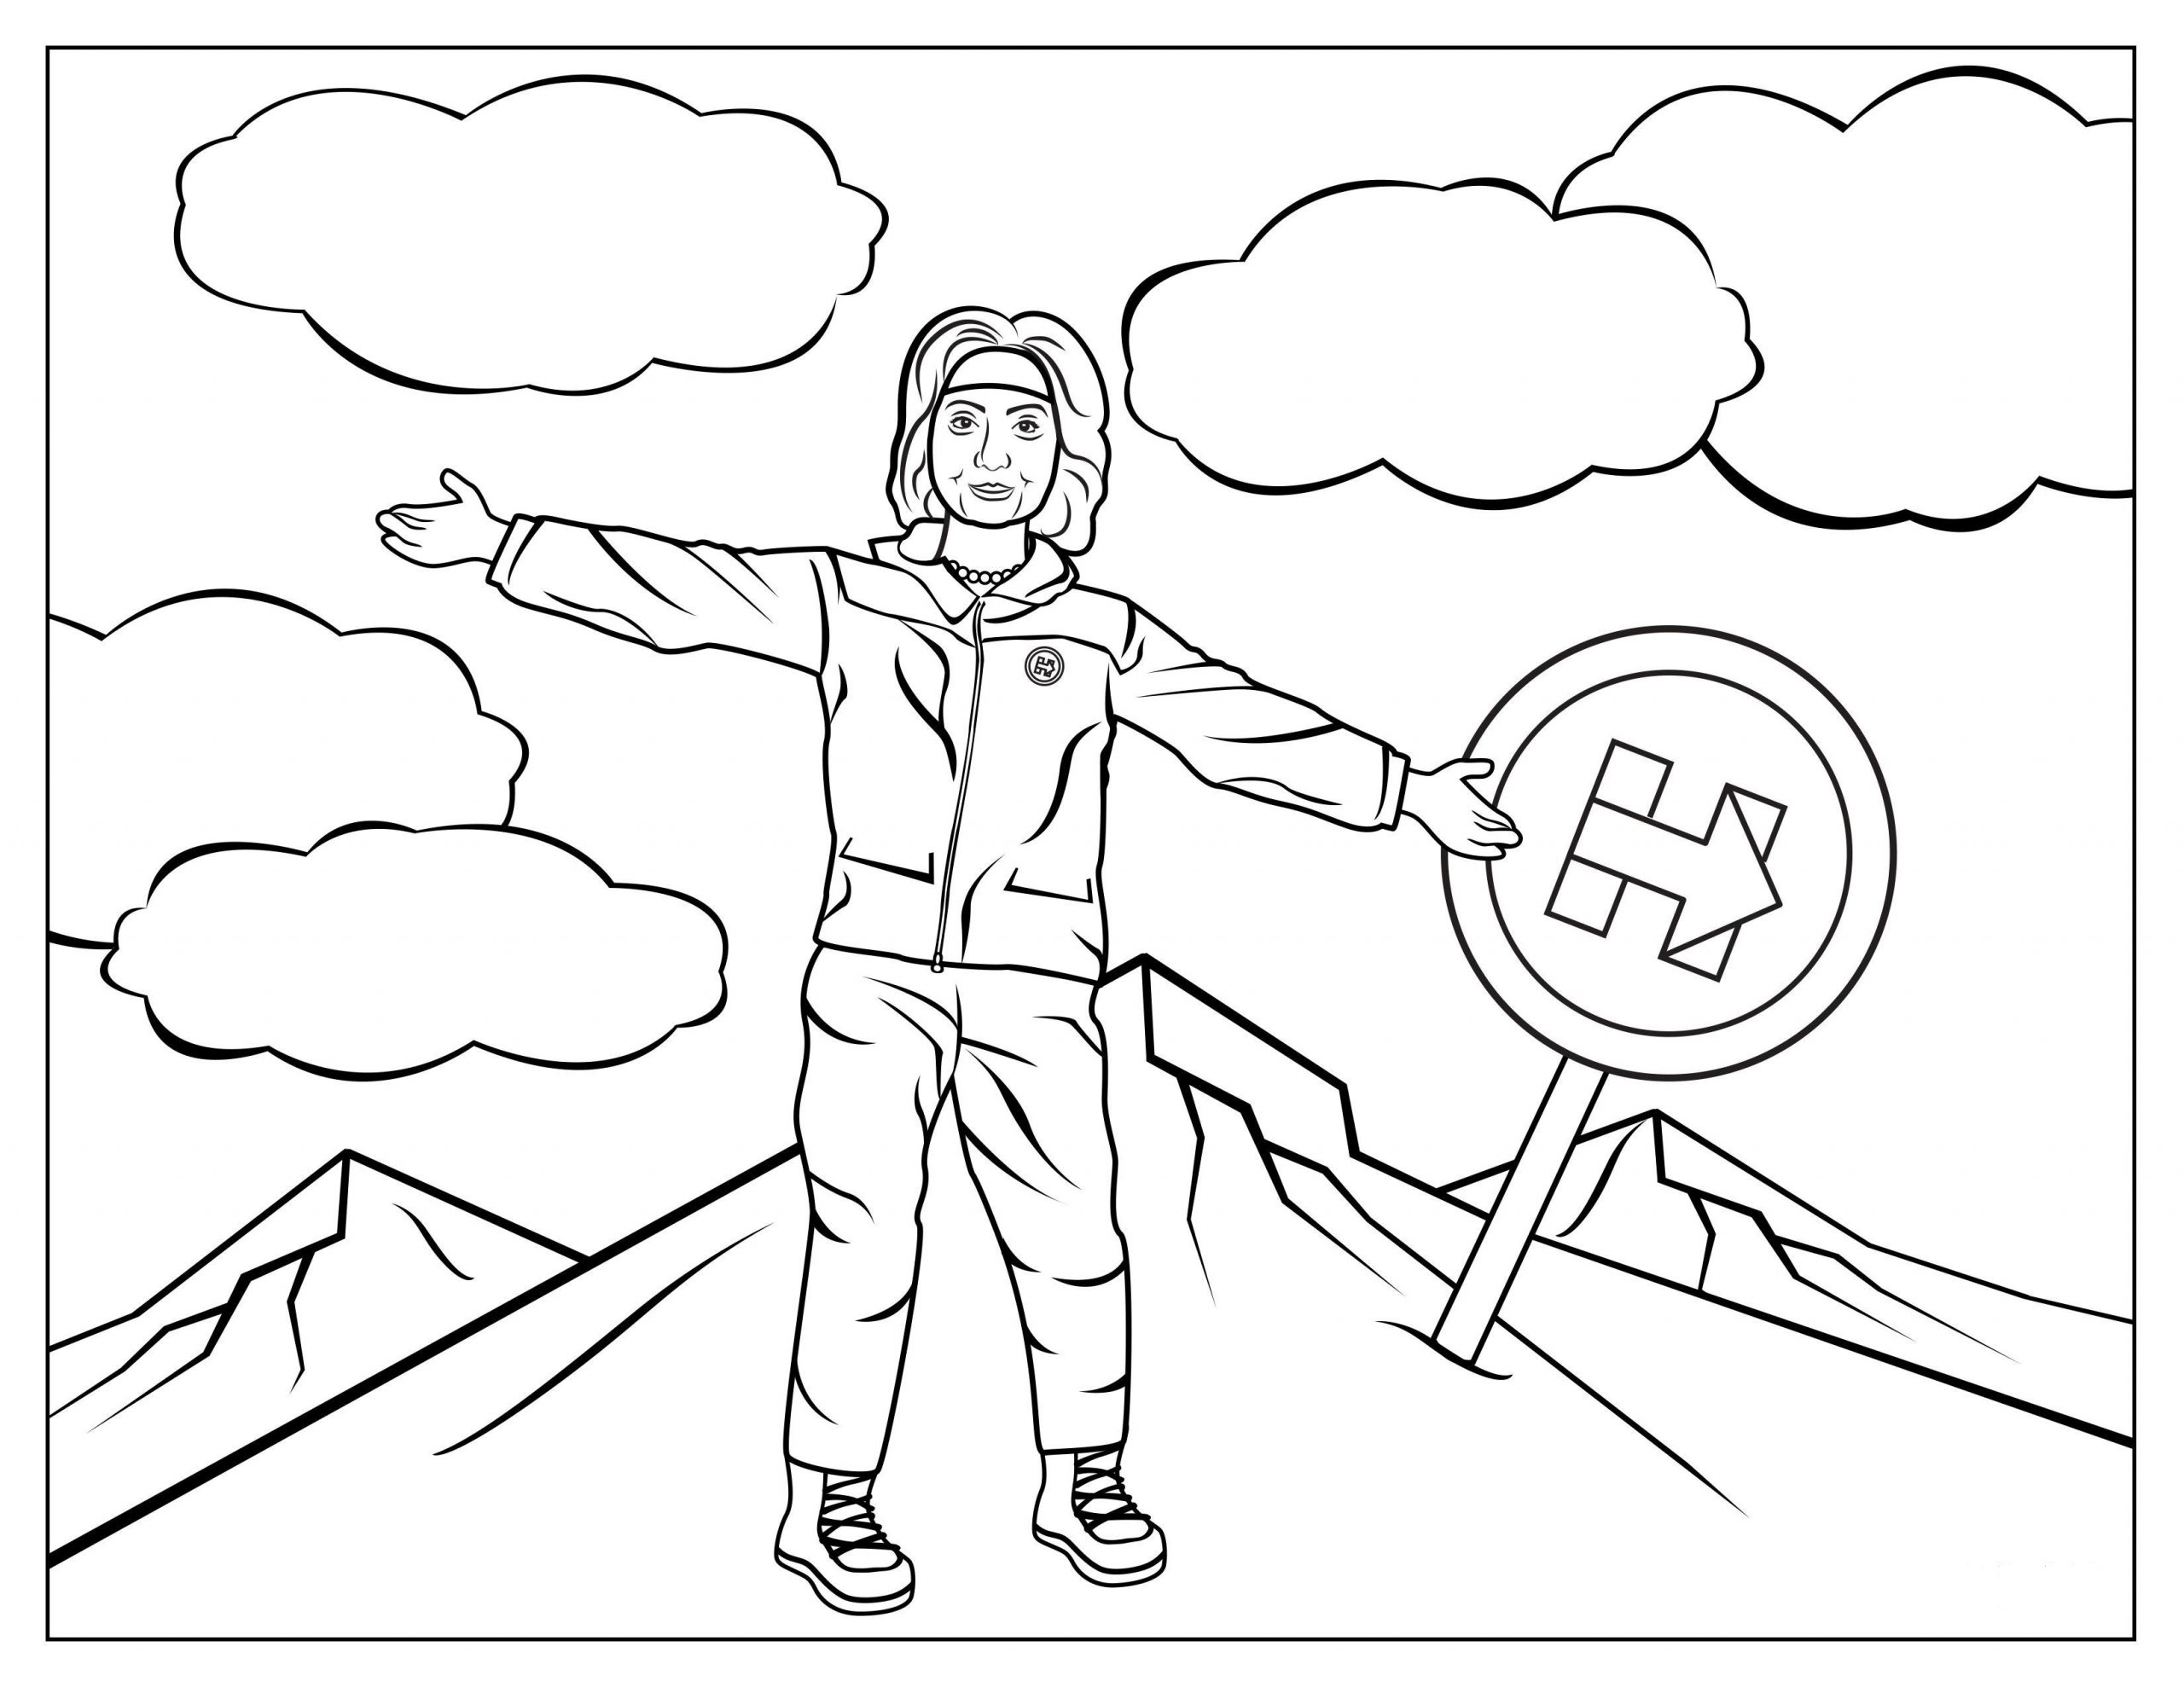 Hillary Clinton Climbing Mountain Coloring Page - Free Printable Coloring  Pages for Kids